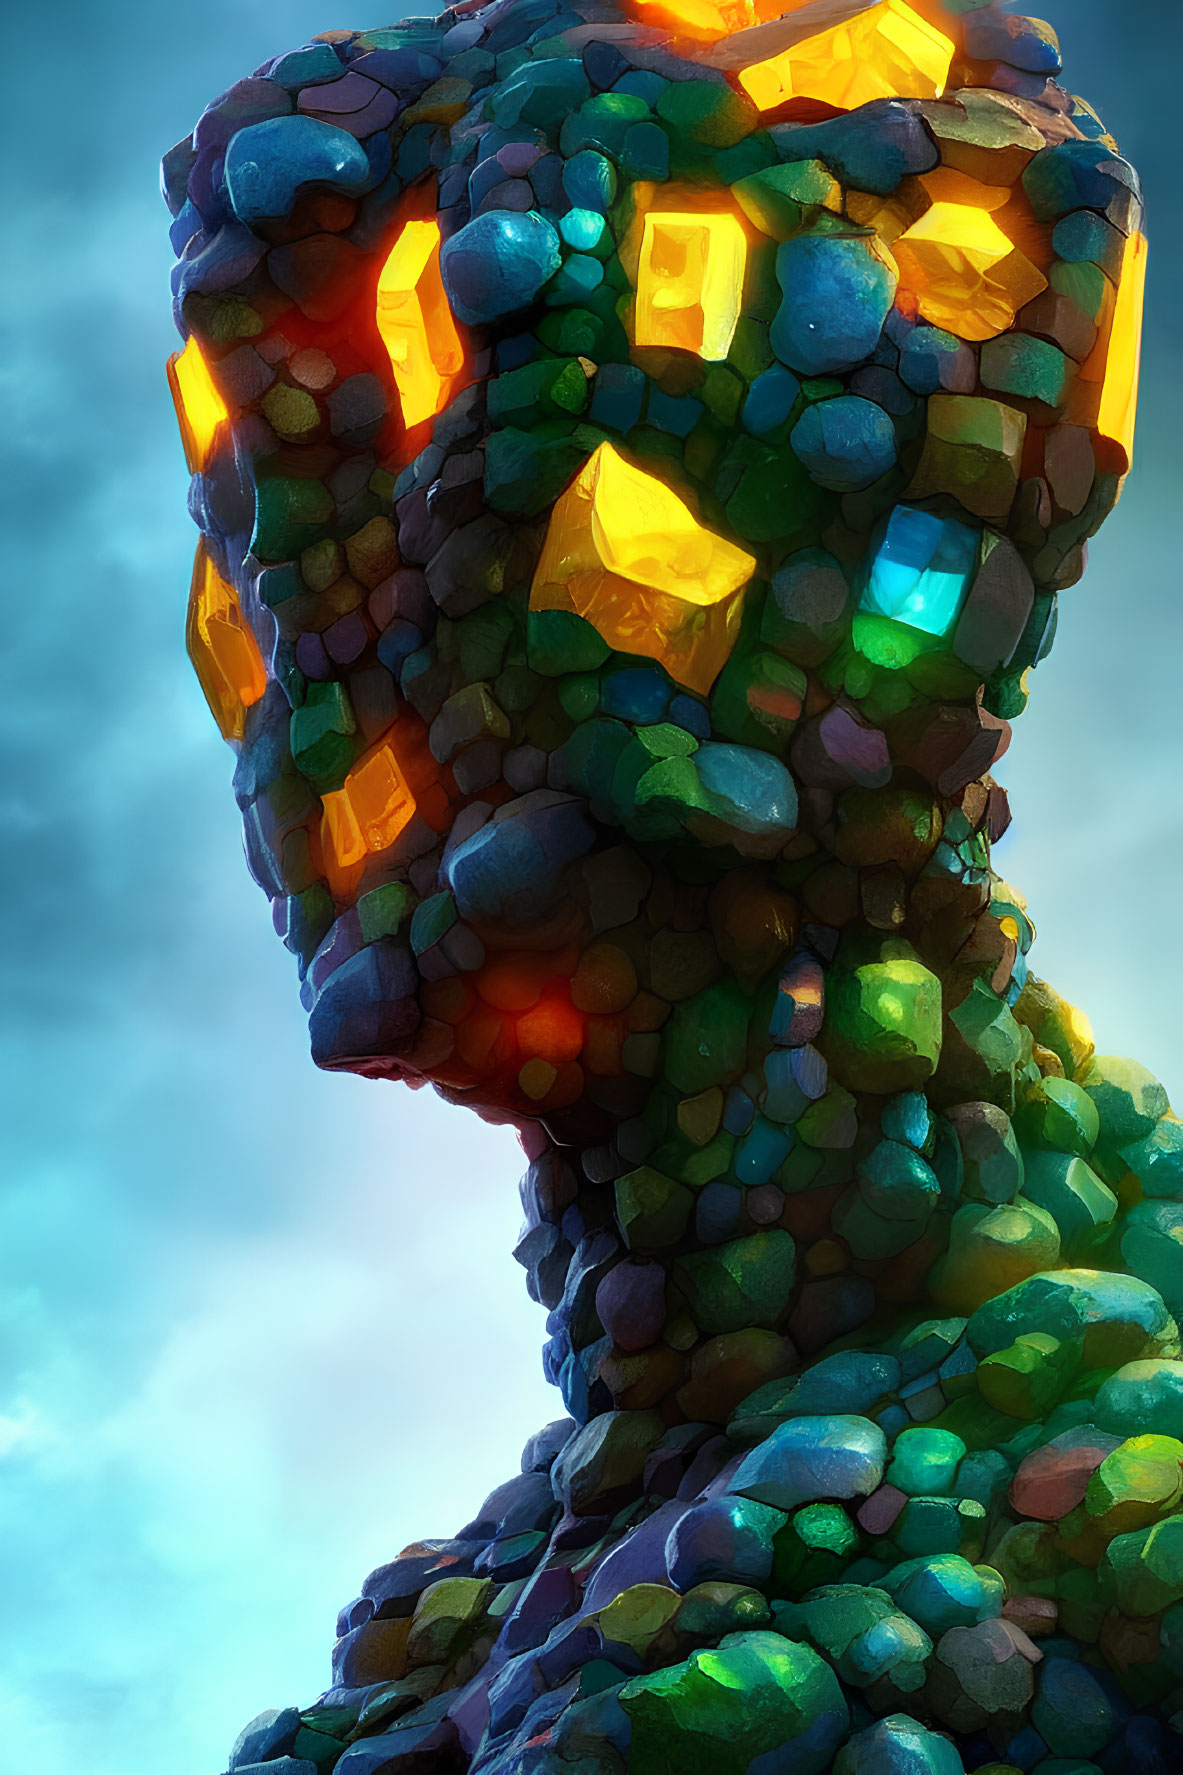 Colorful Crystal Mosaic Humanoid Figure in Cloudy Sky